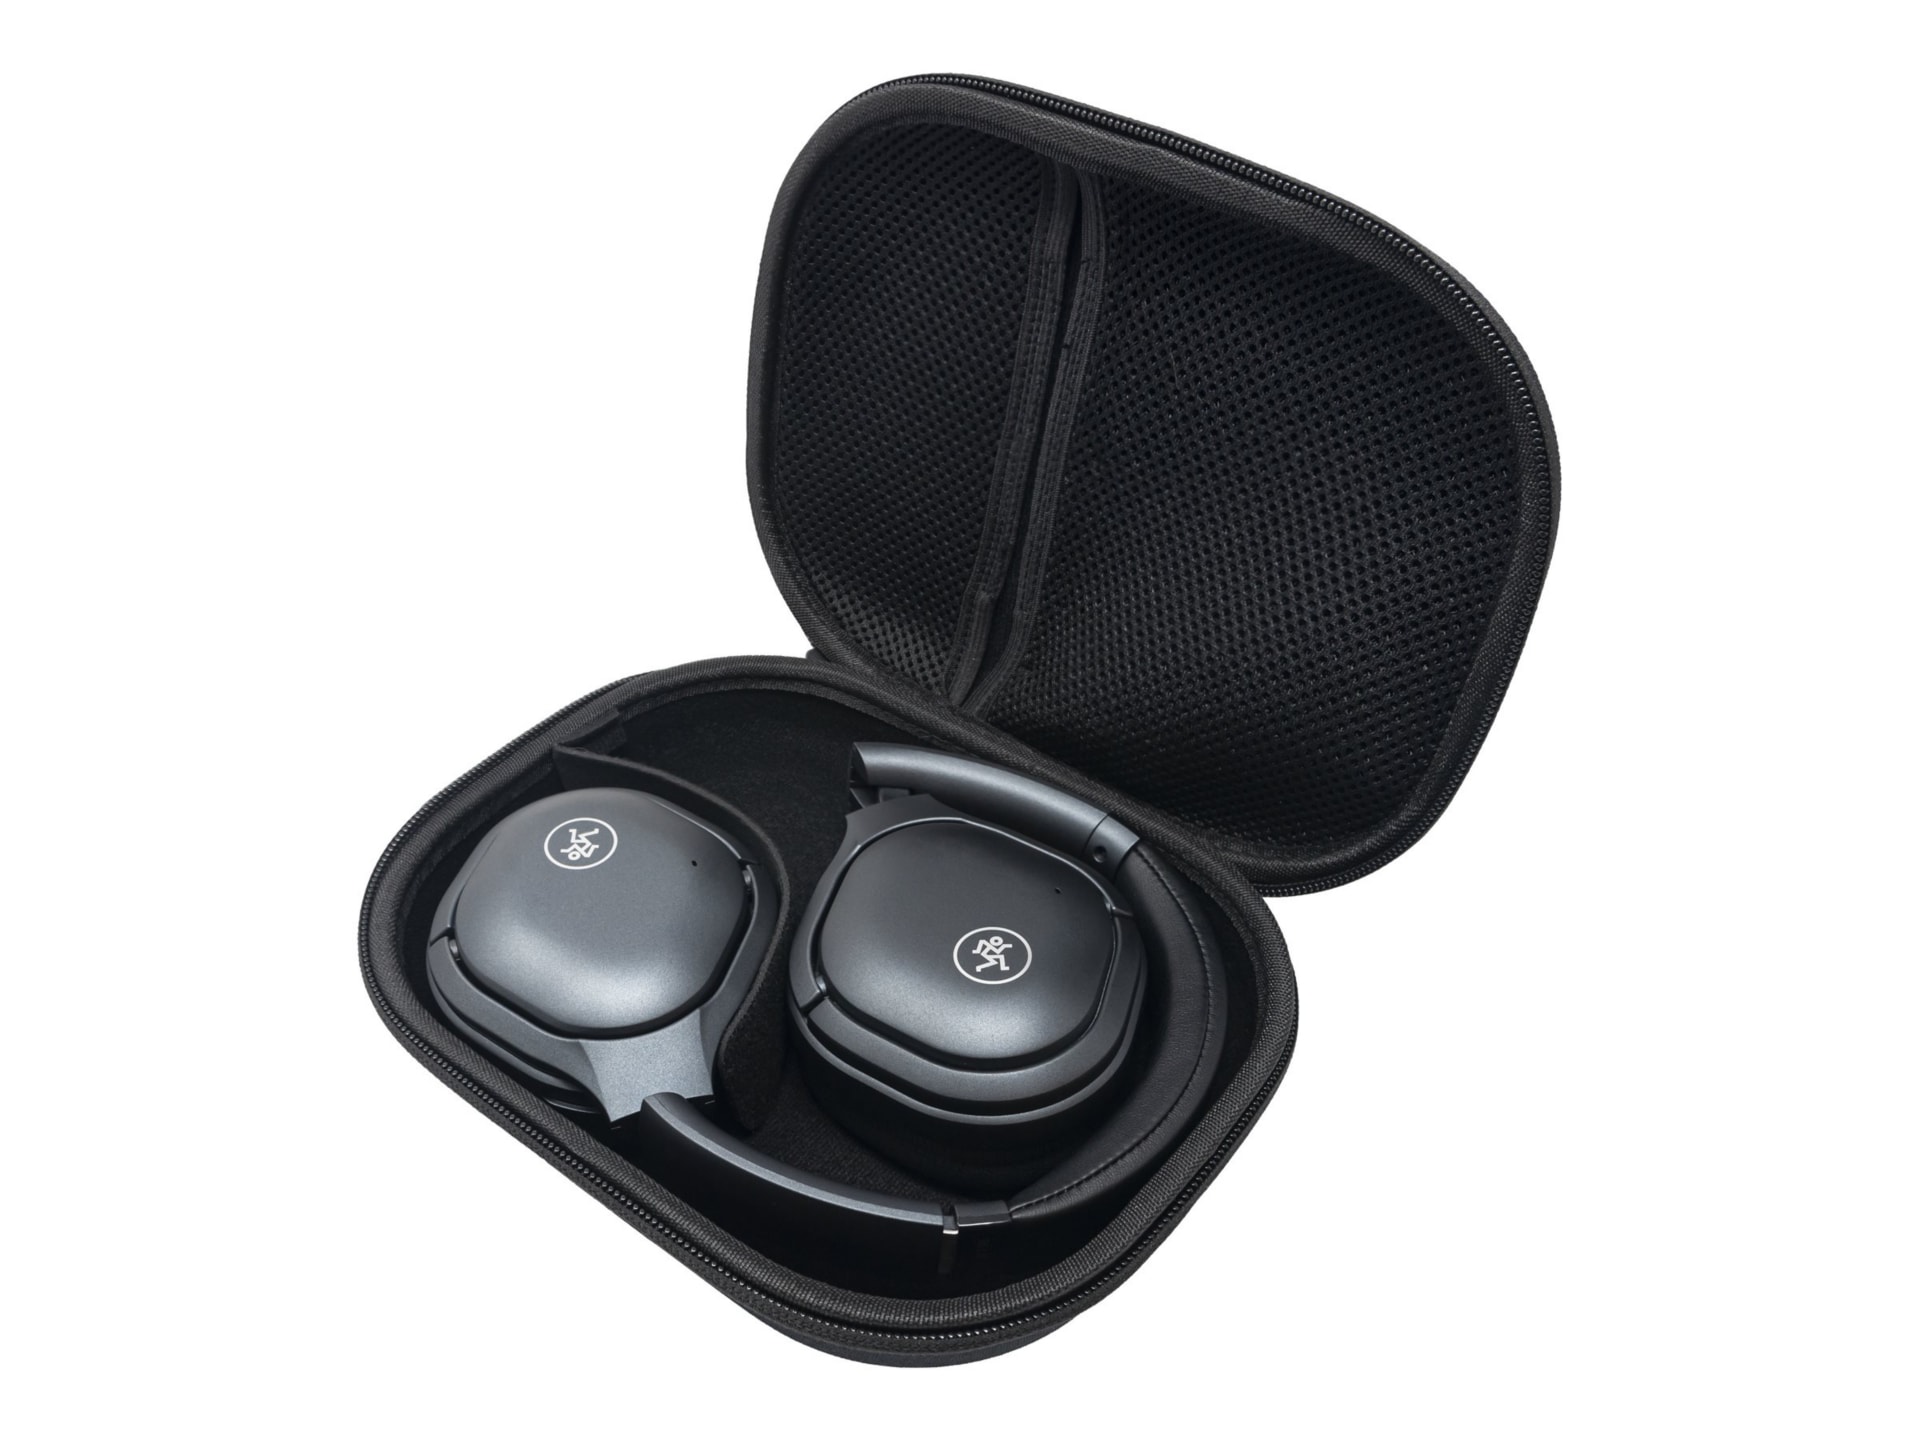 Mackie MC-50BT - wireless noise cancelling headphones with mic - black